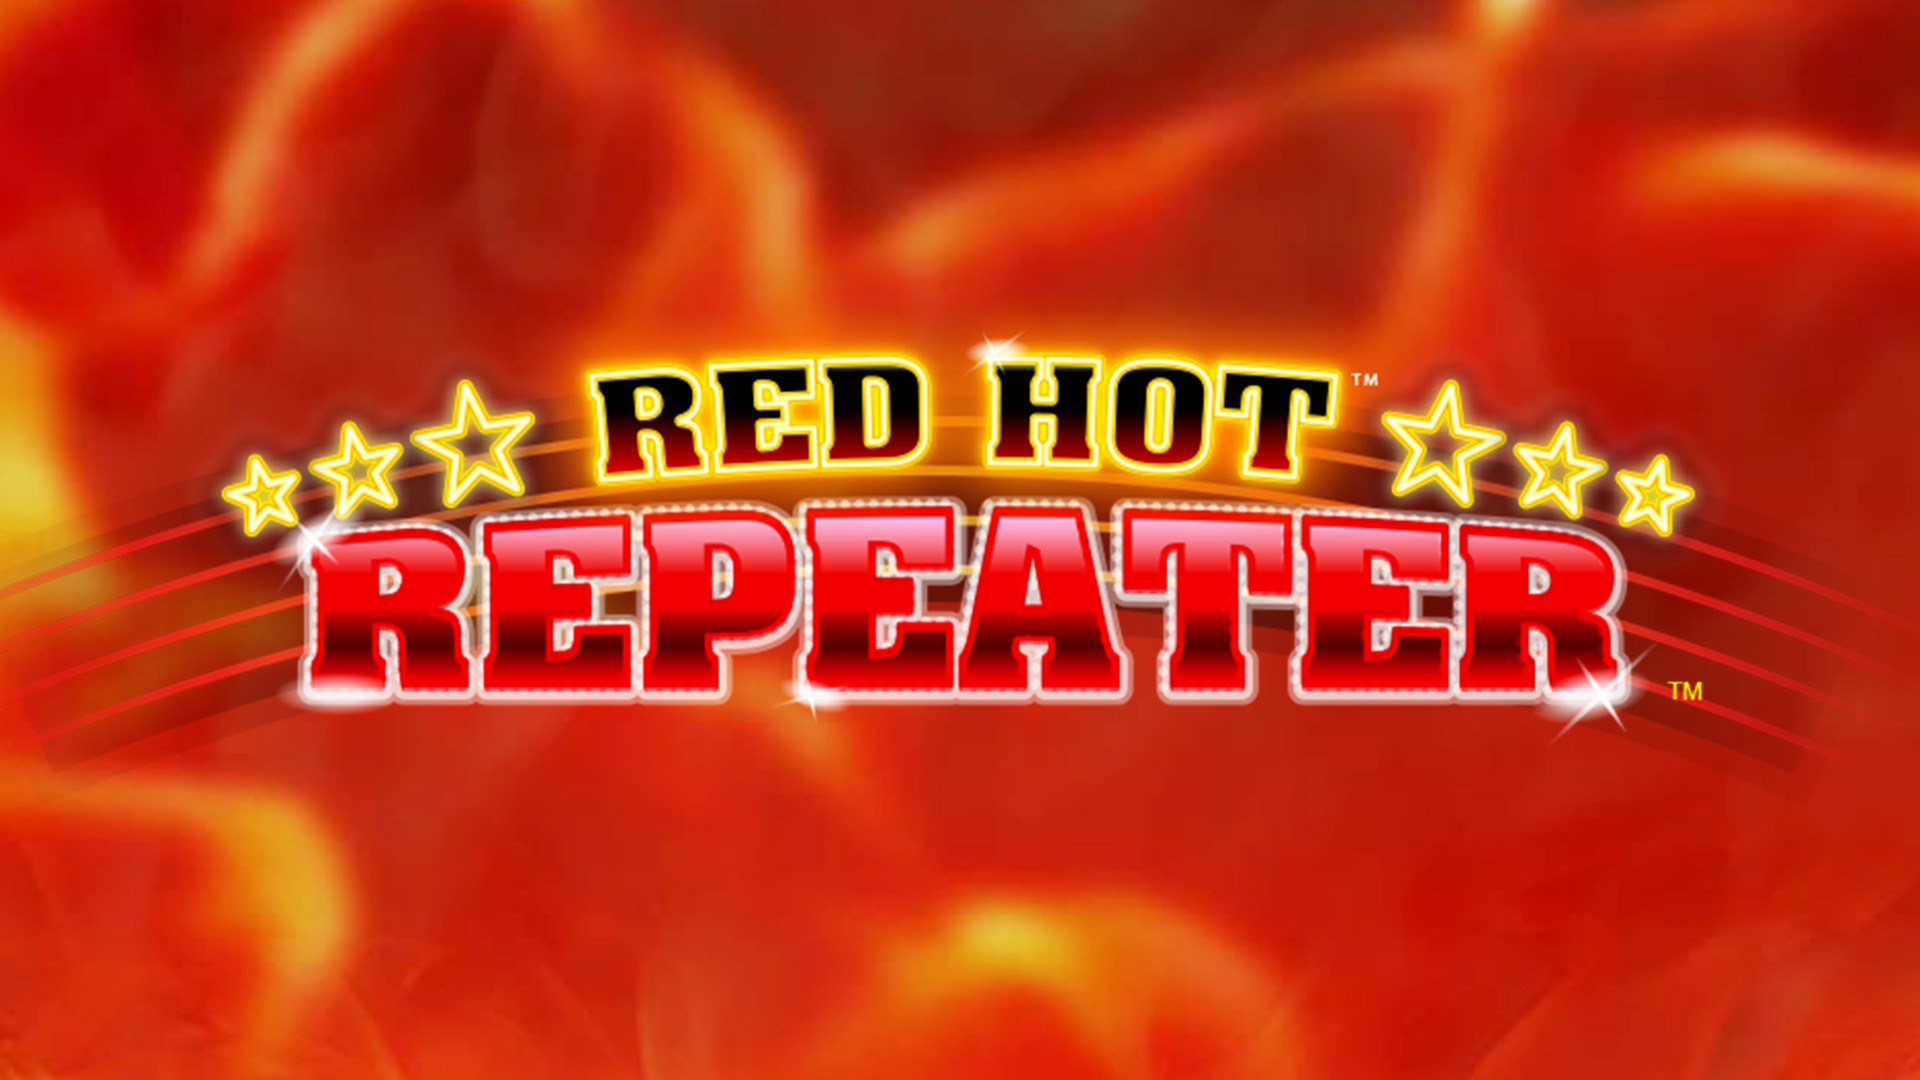 Red Hot Repeater